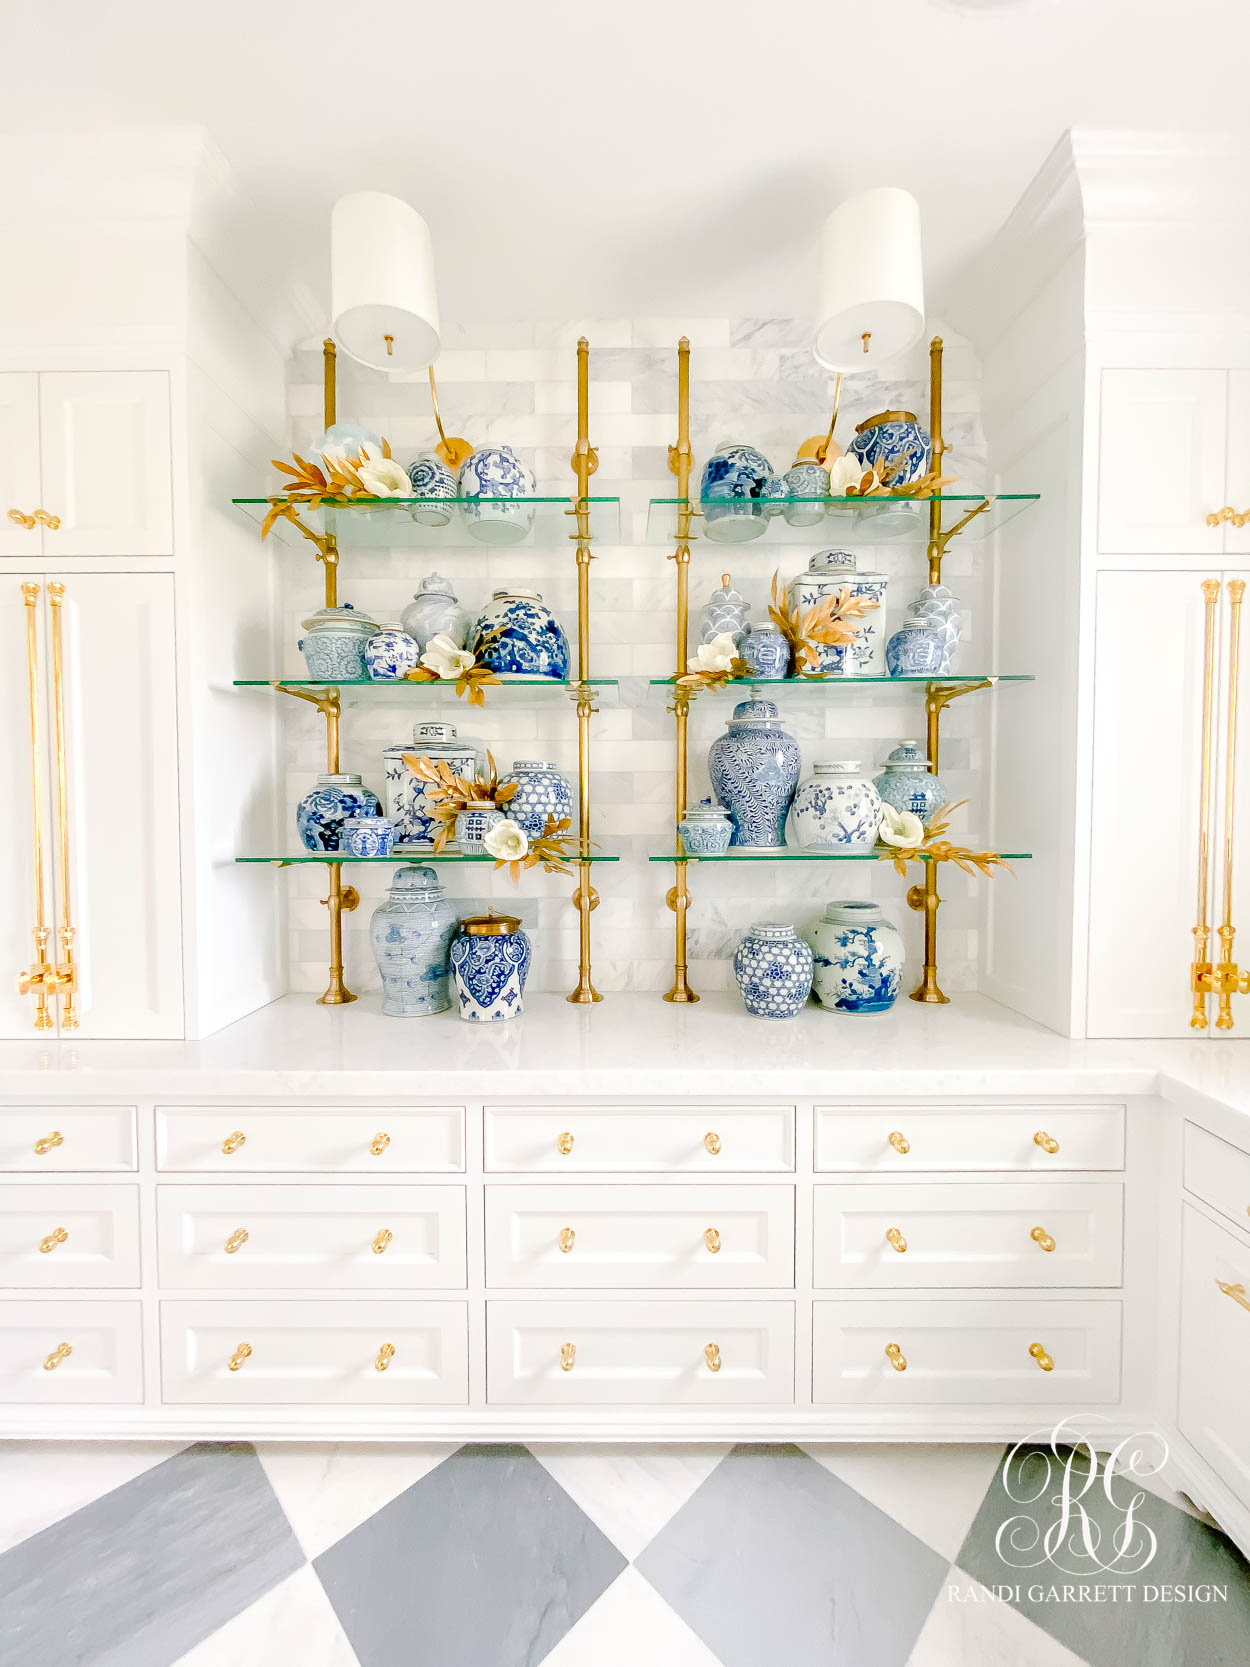 I'll be Home for Christmas Home Tour - Butler's Pantry